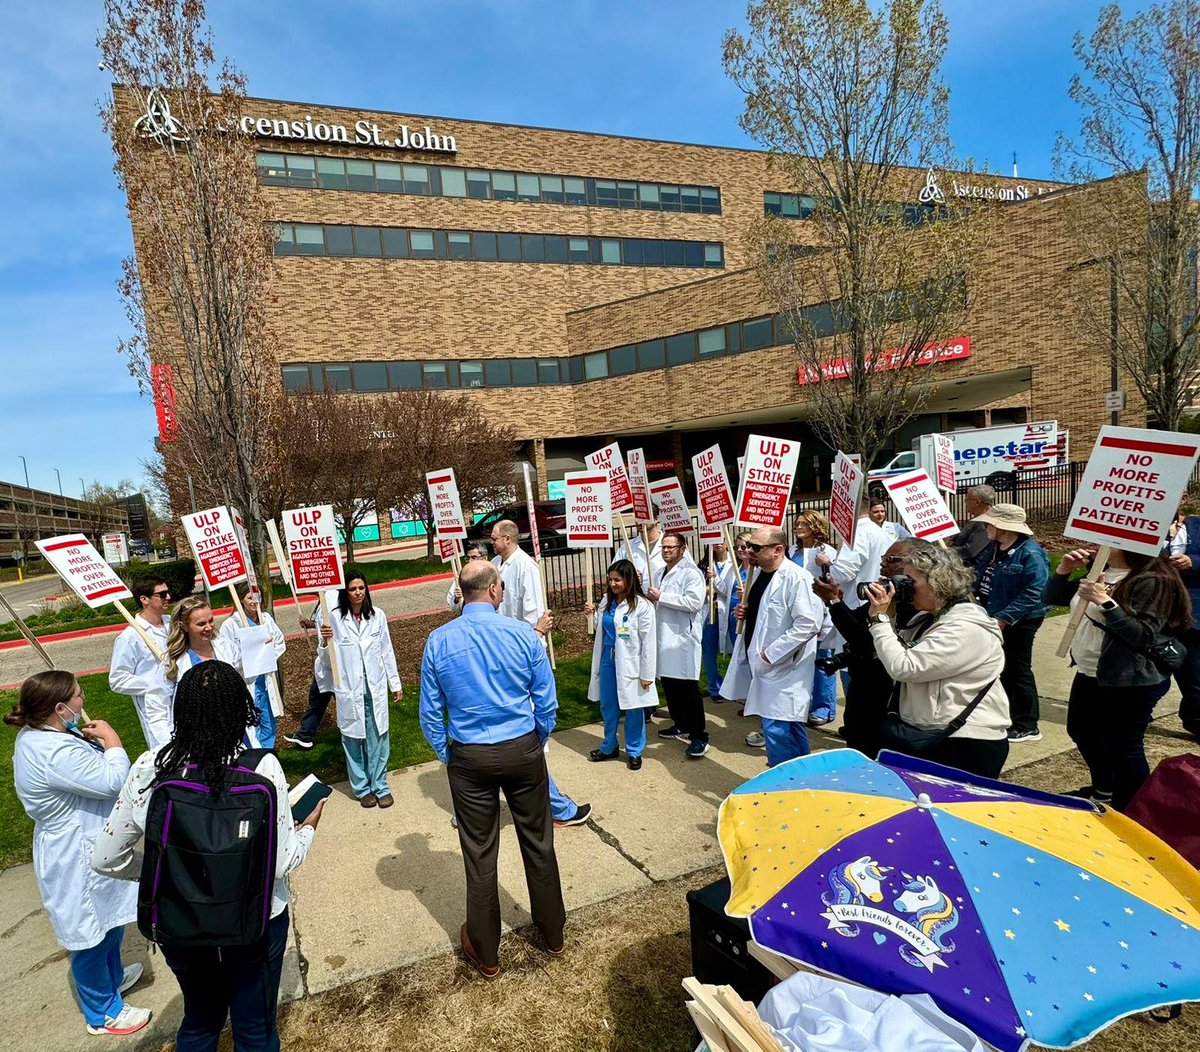 We need health care, not wealth care: ER Doctors, PAs, and NPs shouldn’t be forced to work while sick, exposing already compromised patients to bigger dangers. We support the @SaveOurER ULP strike!